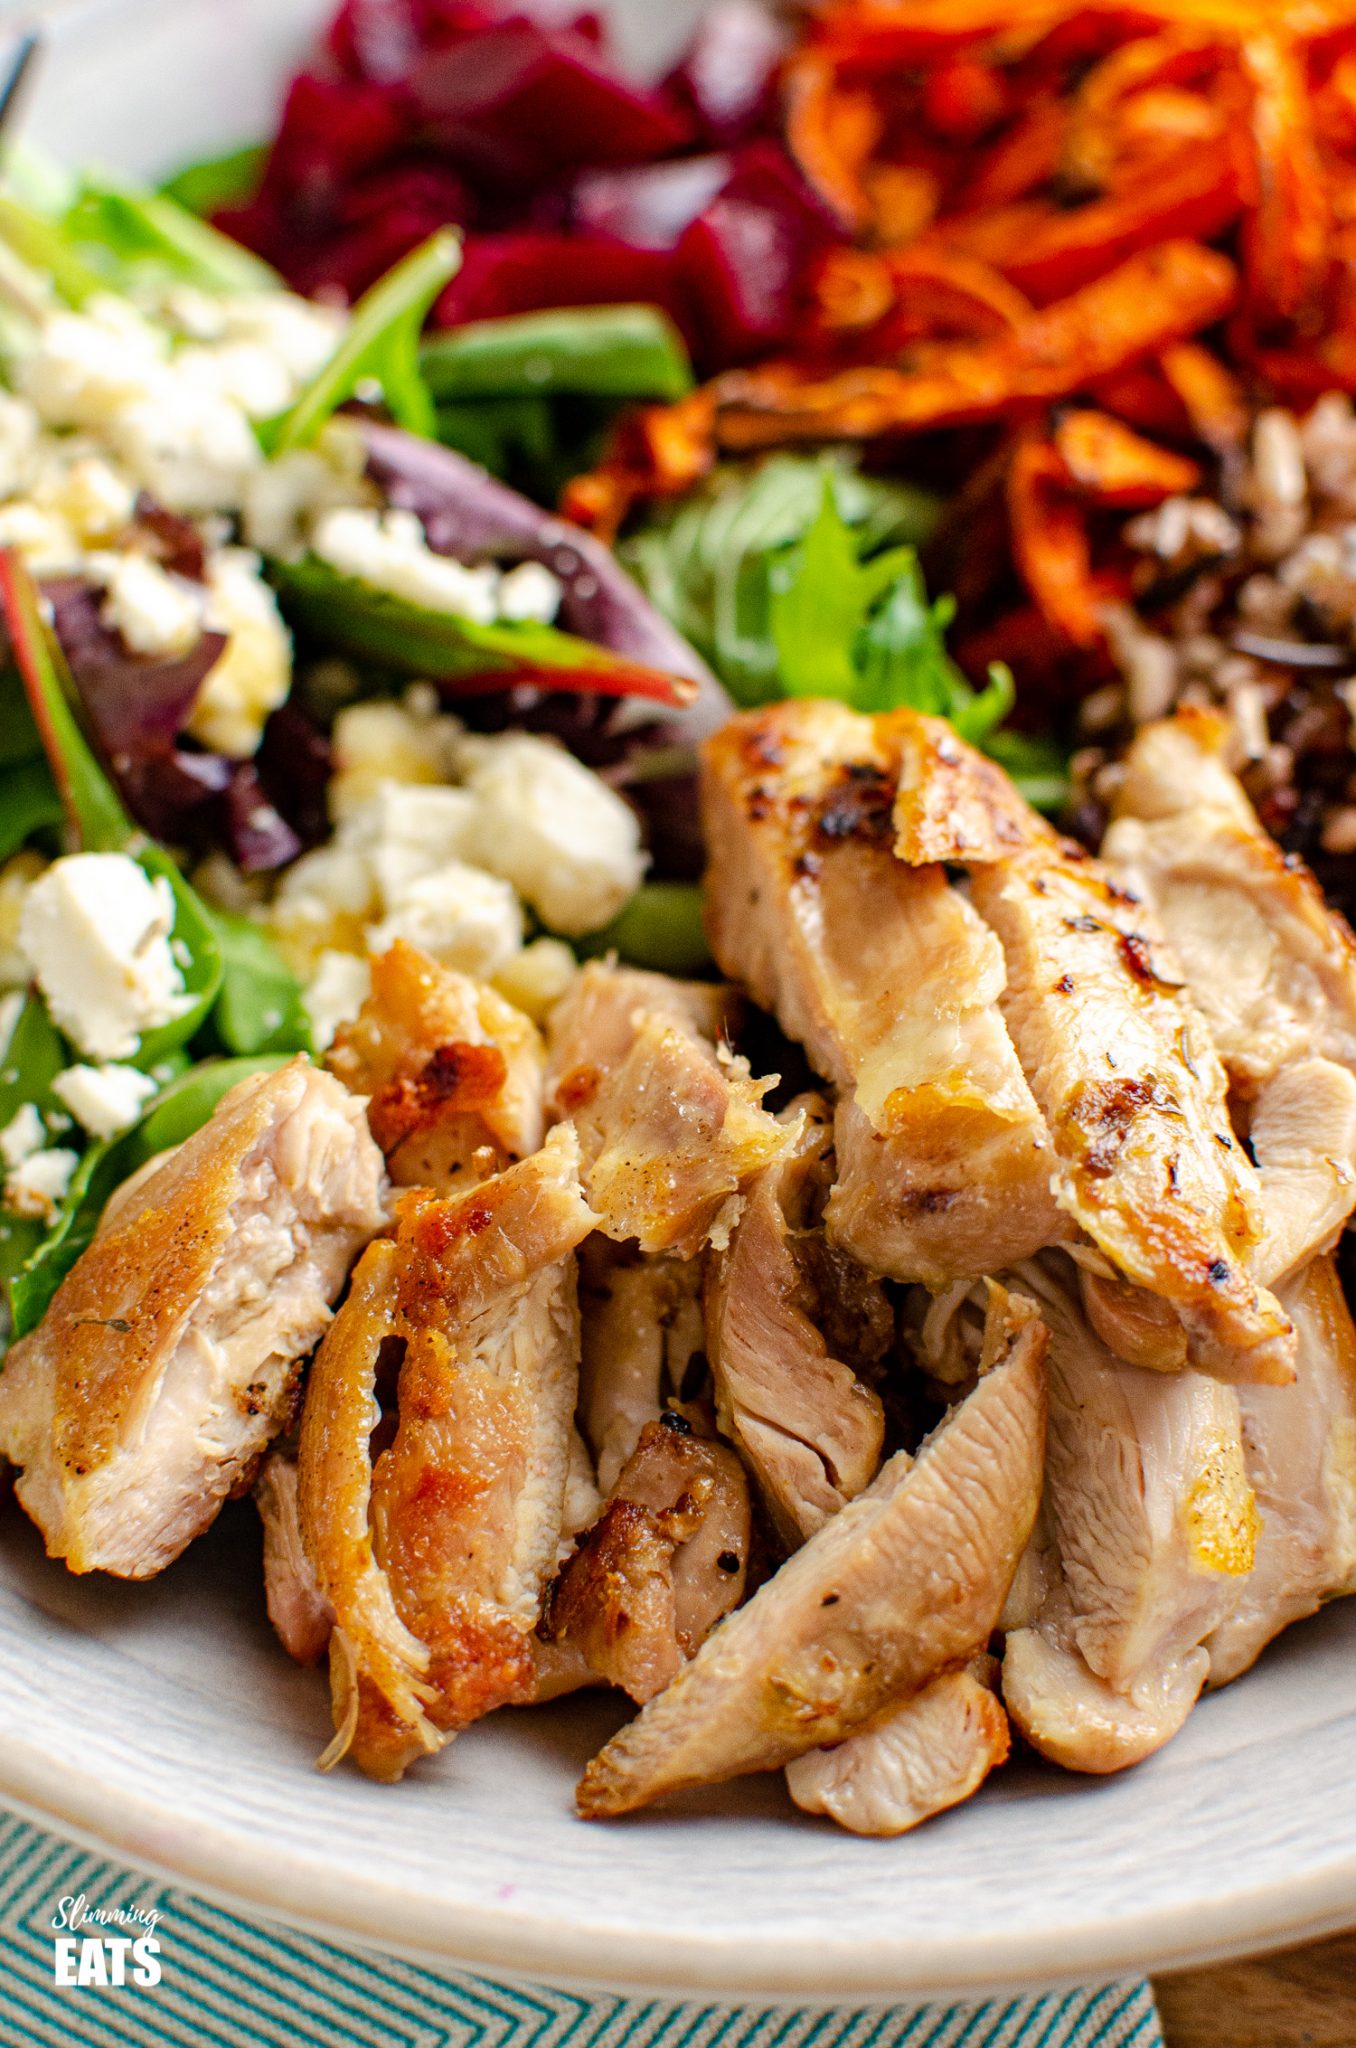 close up of Chicken Wild Rice Bowl - tender seasoned chicken thighs with a delicious nutty wild rice blend, roasted carrot strands, salad with beets and feta in a bowl 